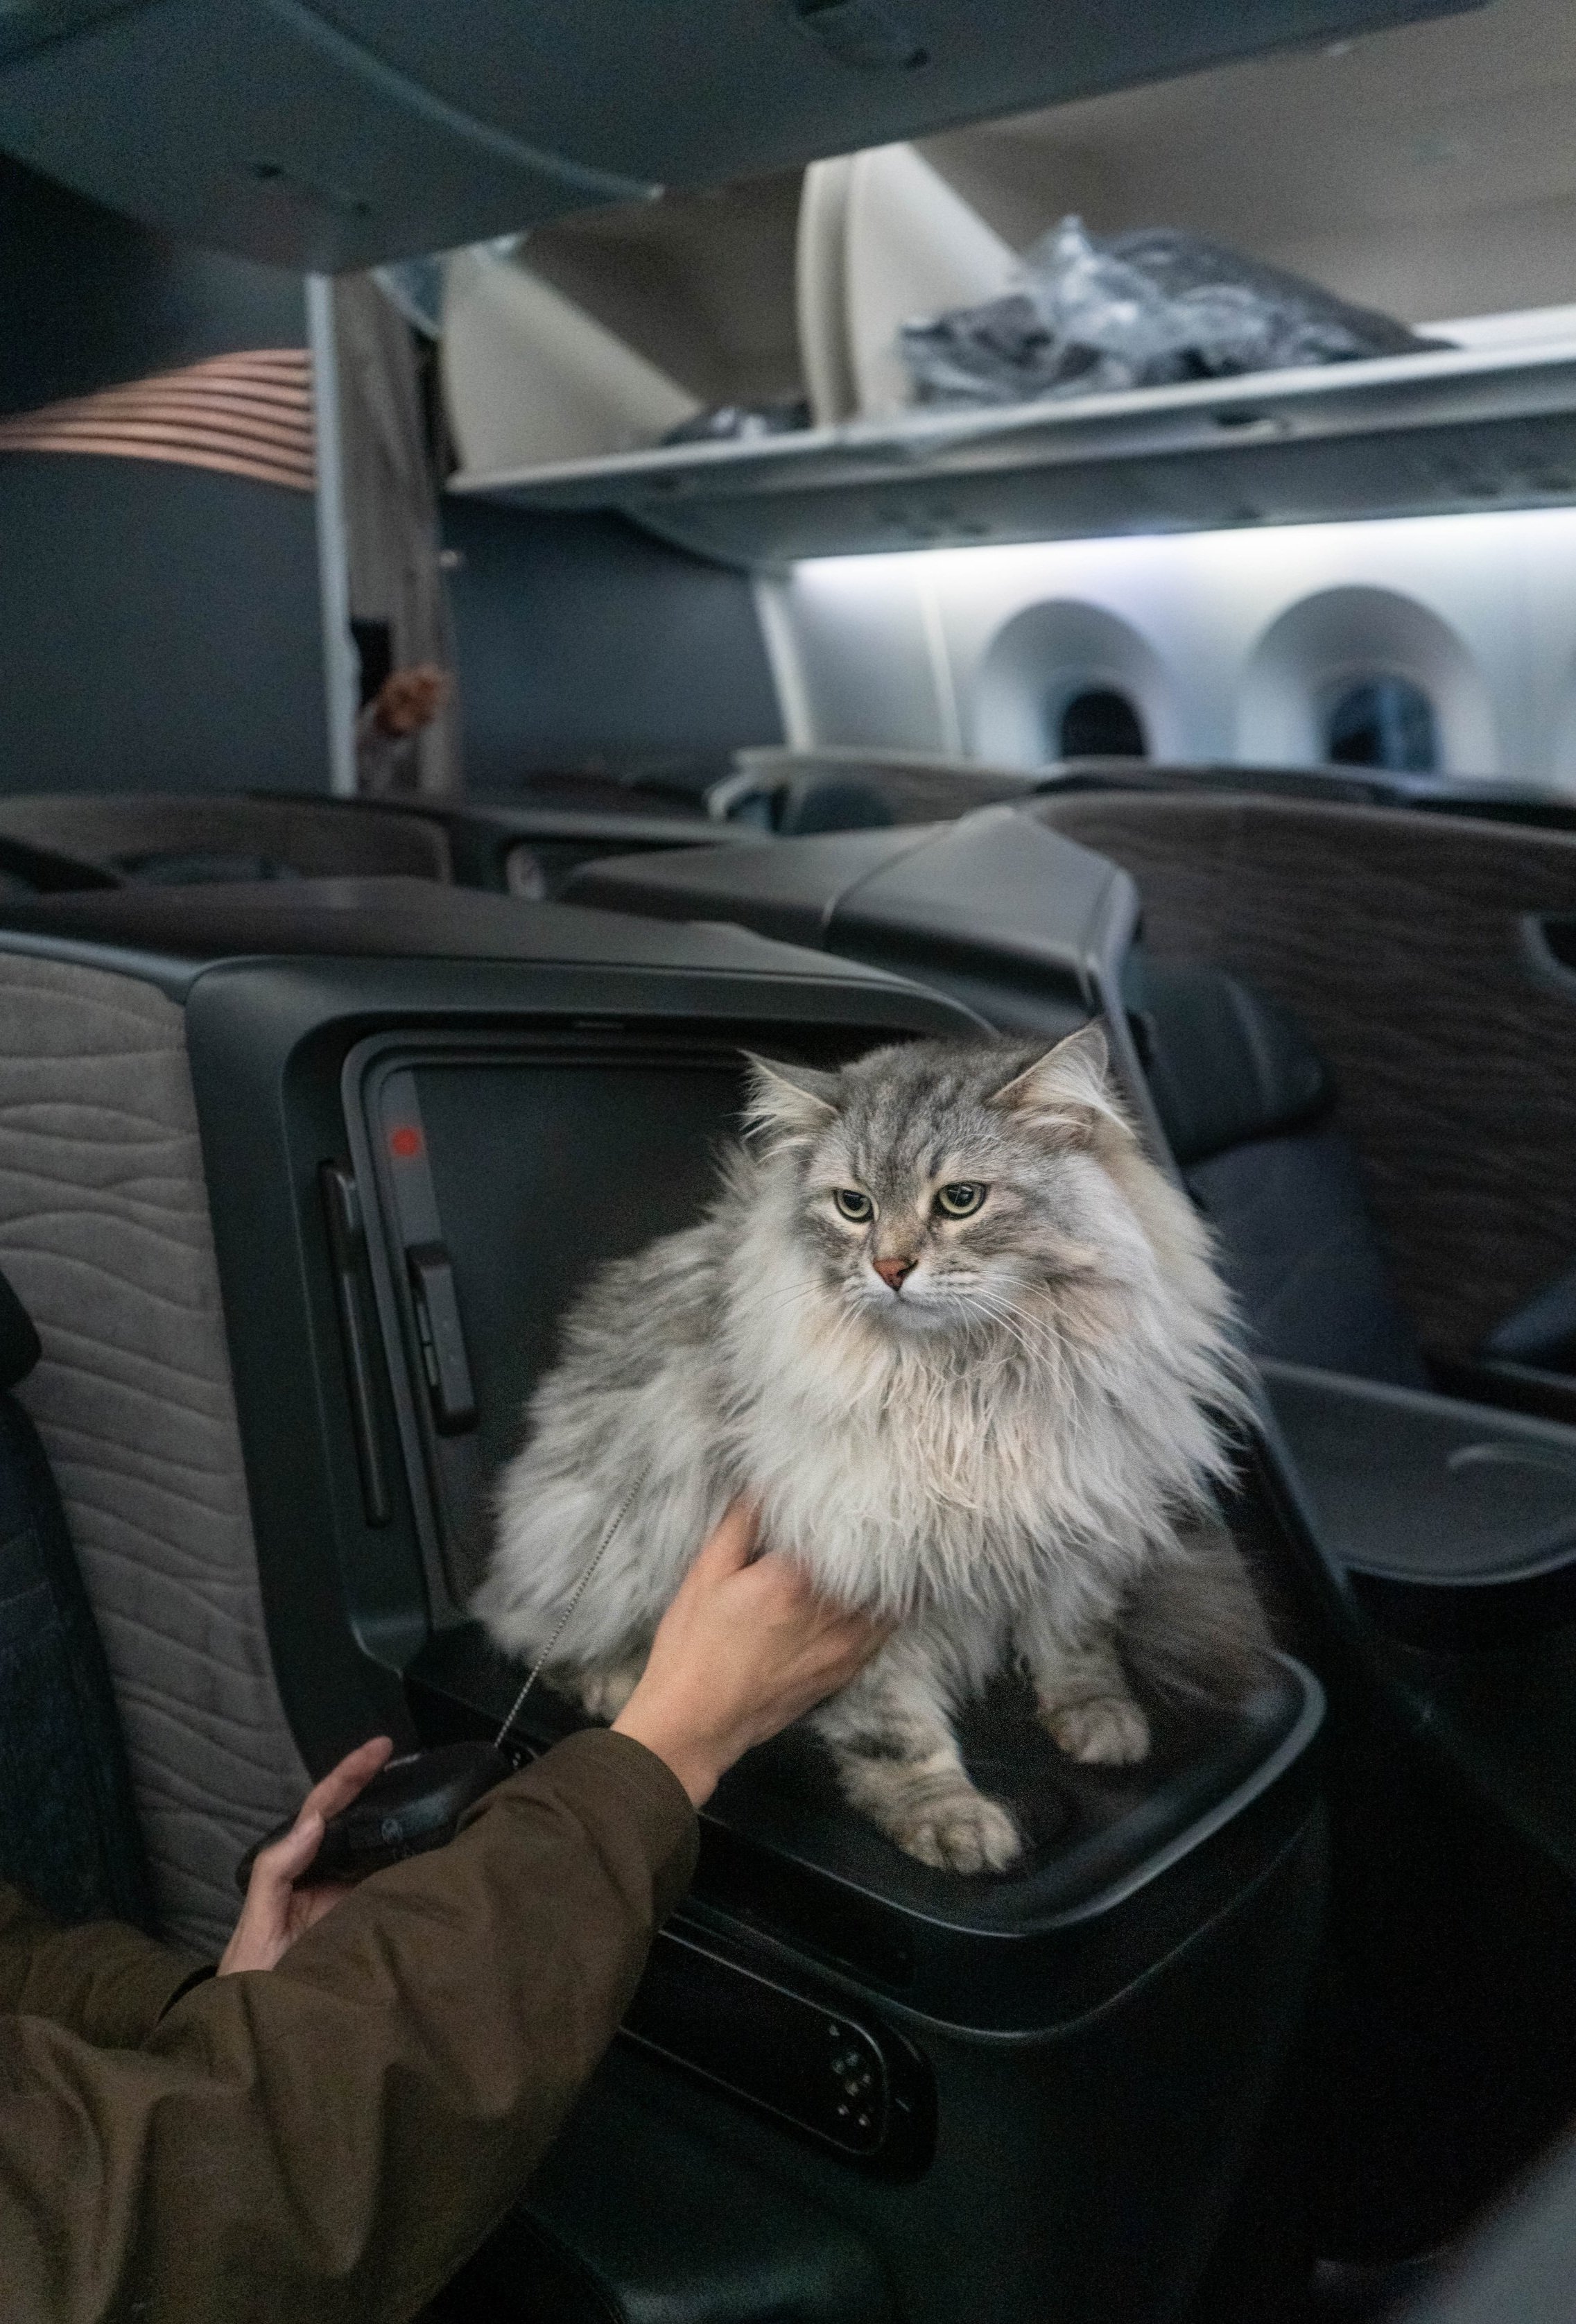 turkish airlines travelling with cat